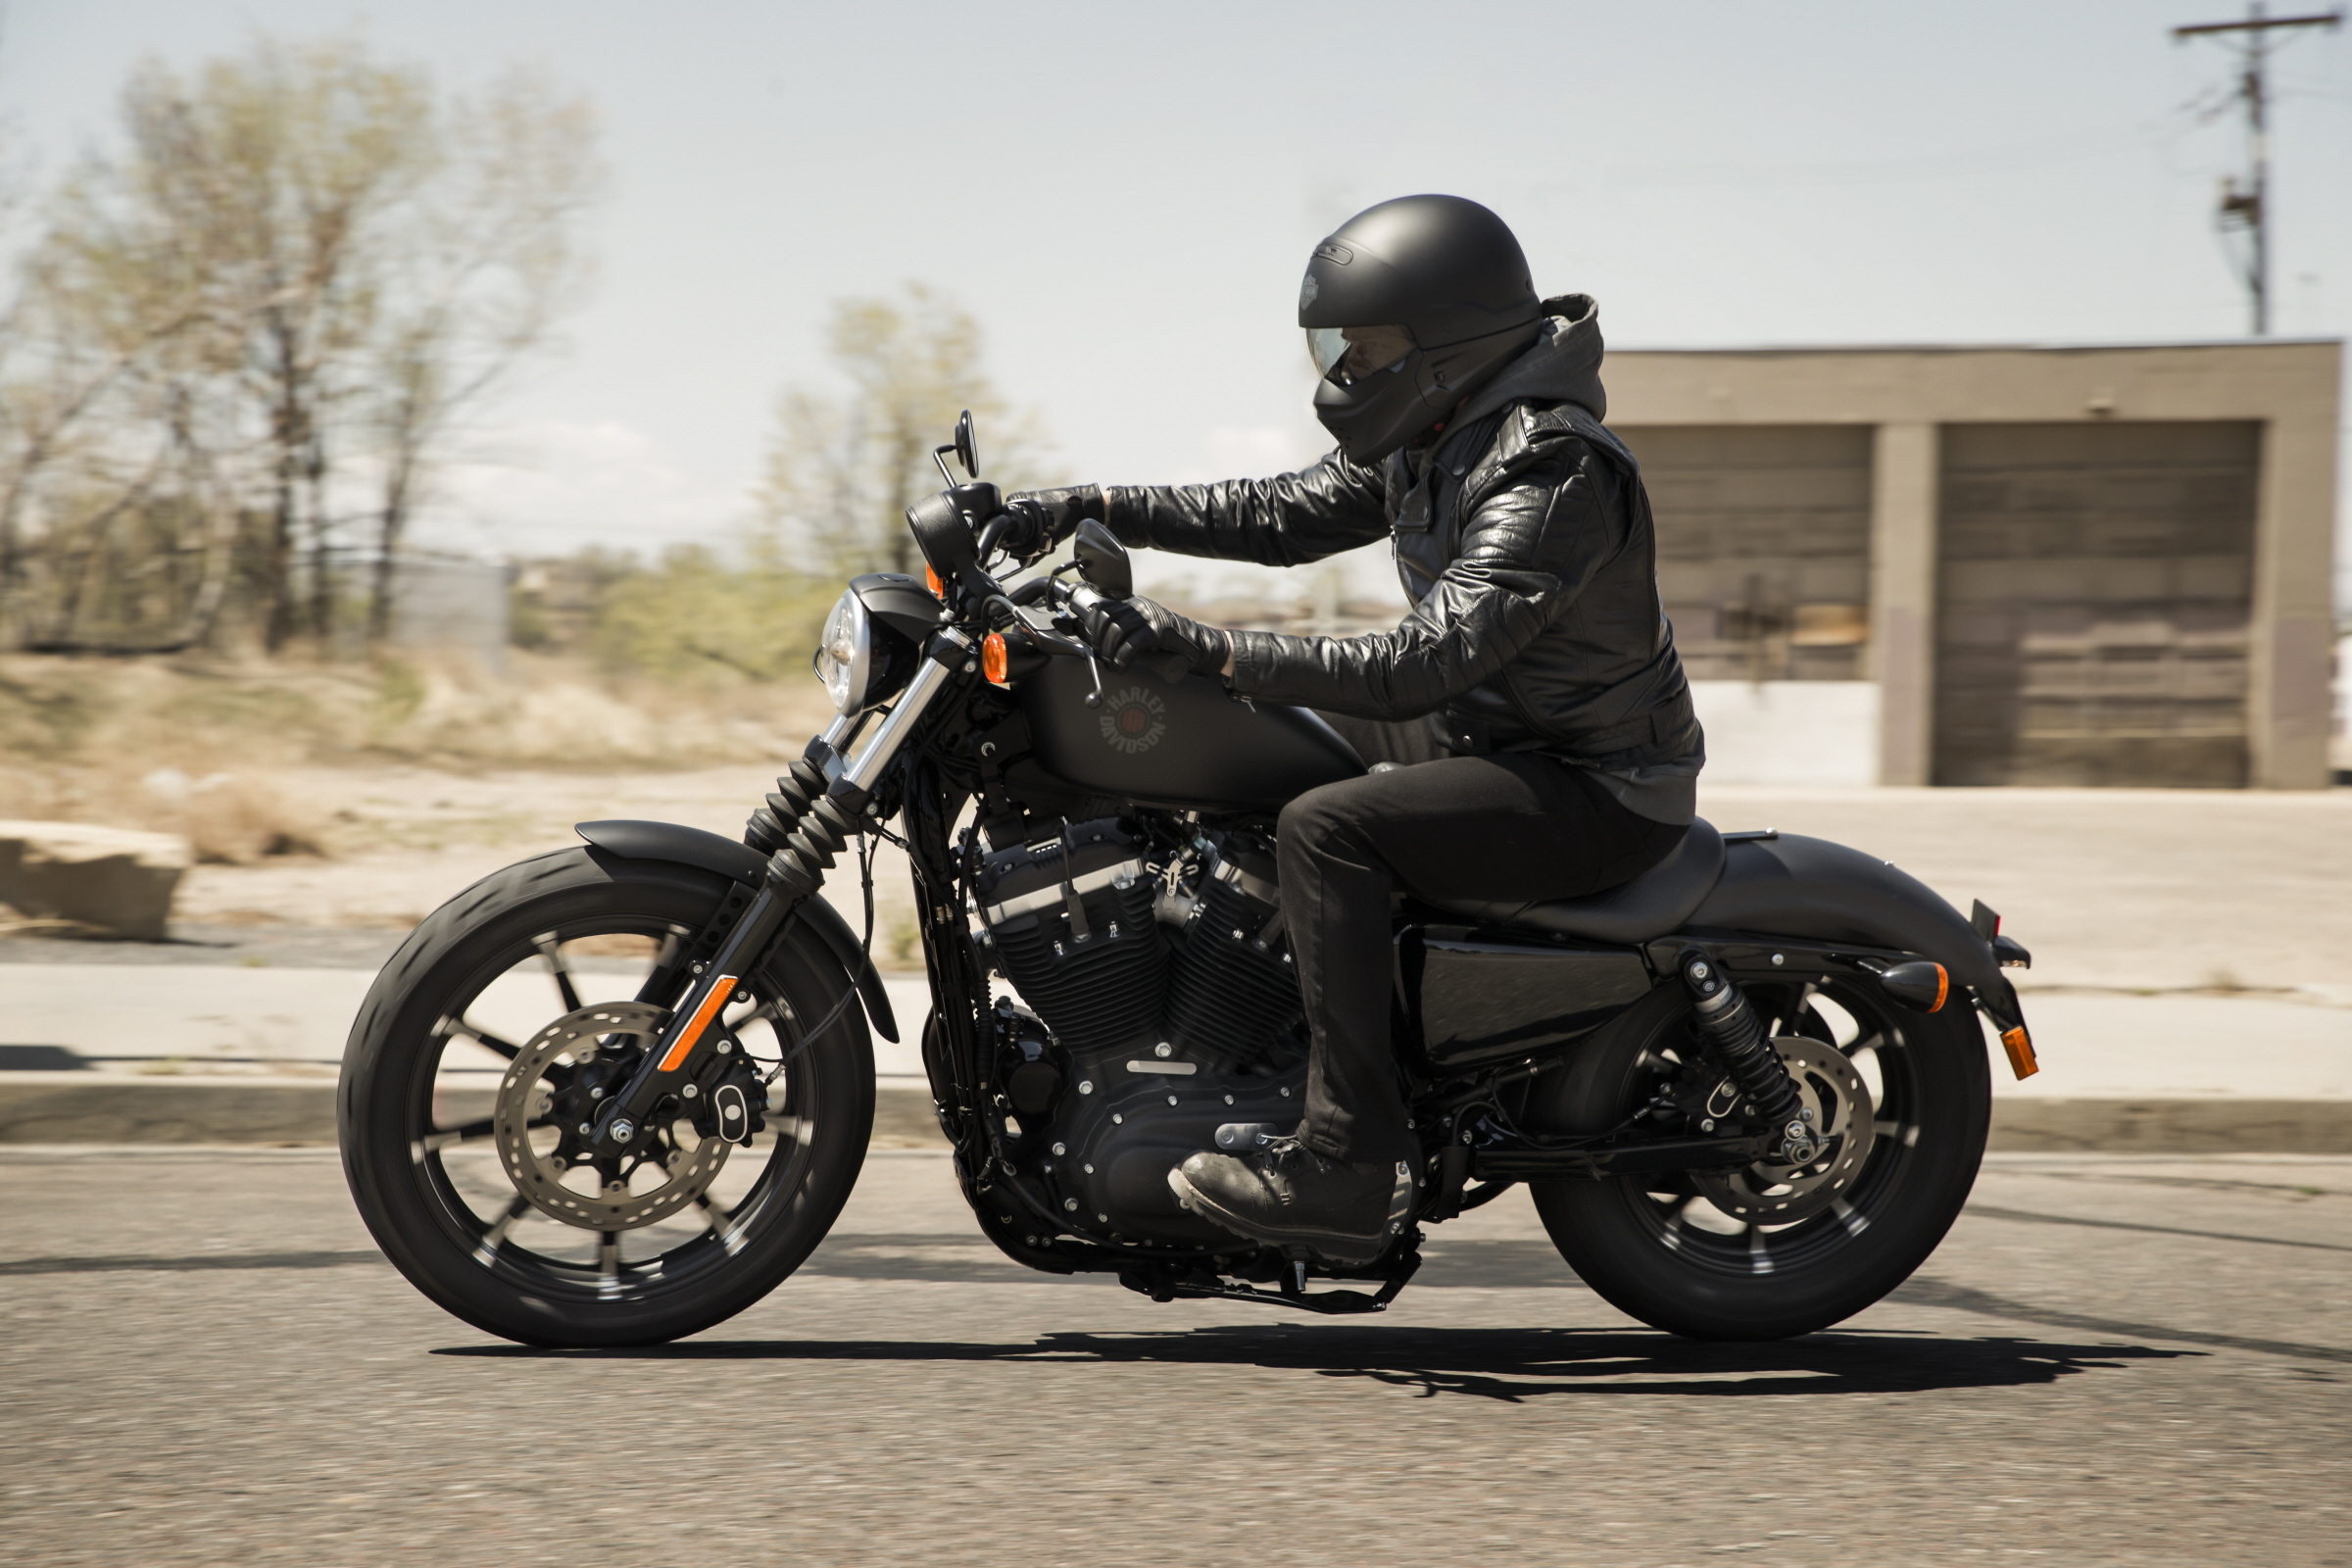 Harley Dealers In India Include Riding Gear With New Sportsters Harley Davidson Forums